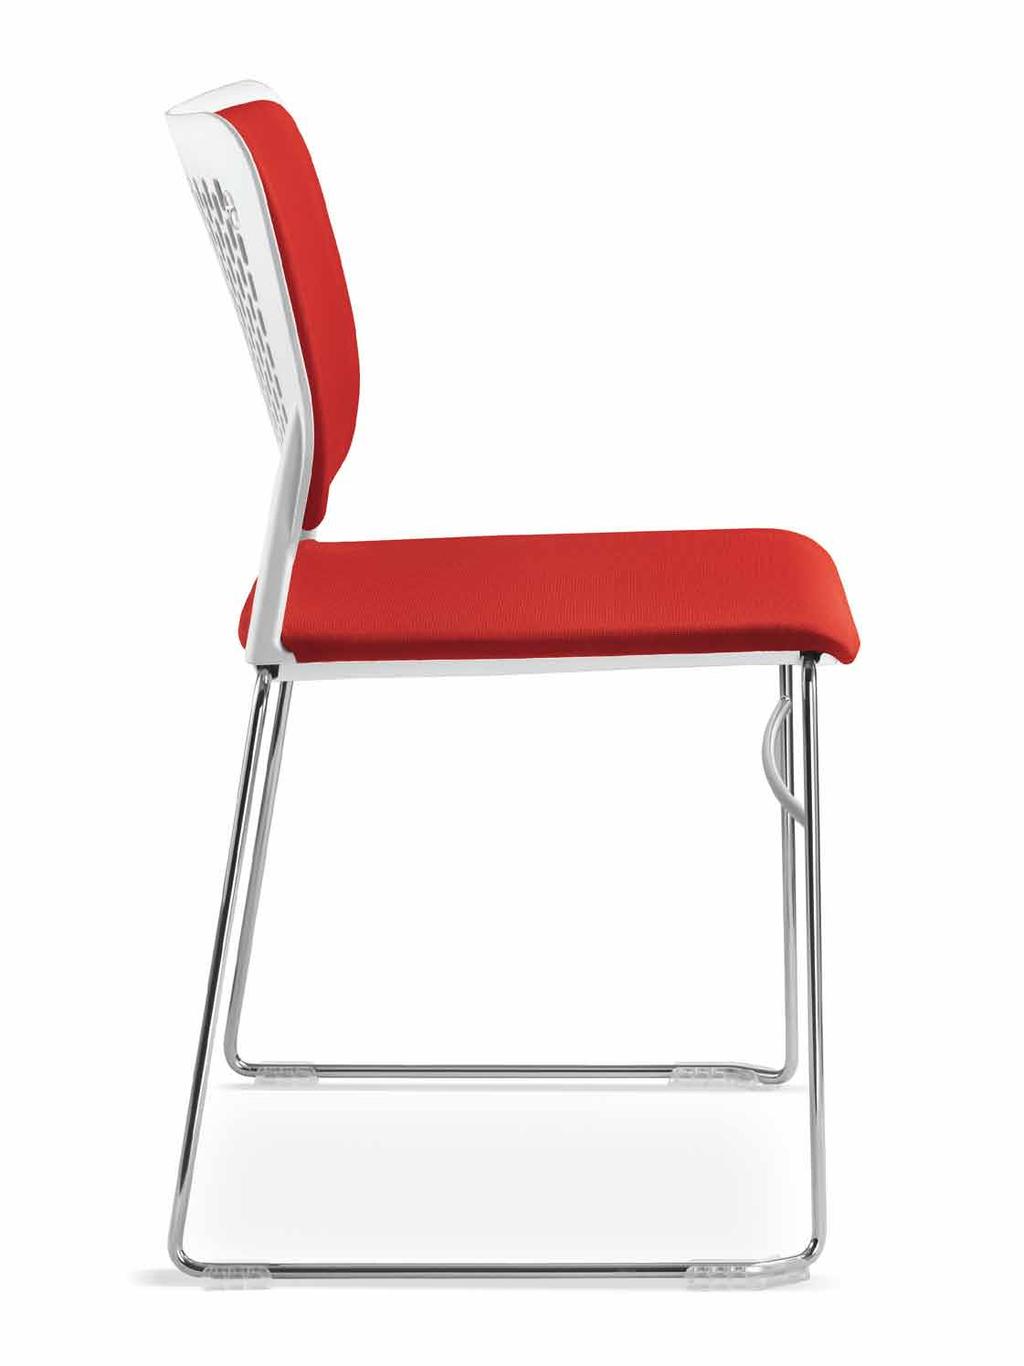 Time models with an upholstered seat or upholstered back and seat provide excellent comfort.